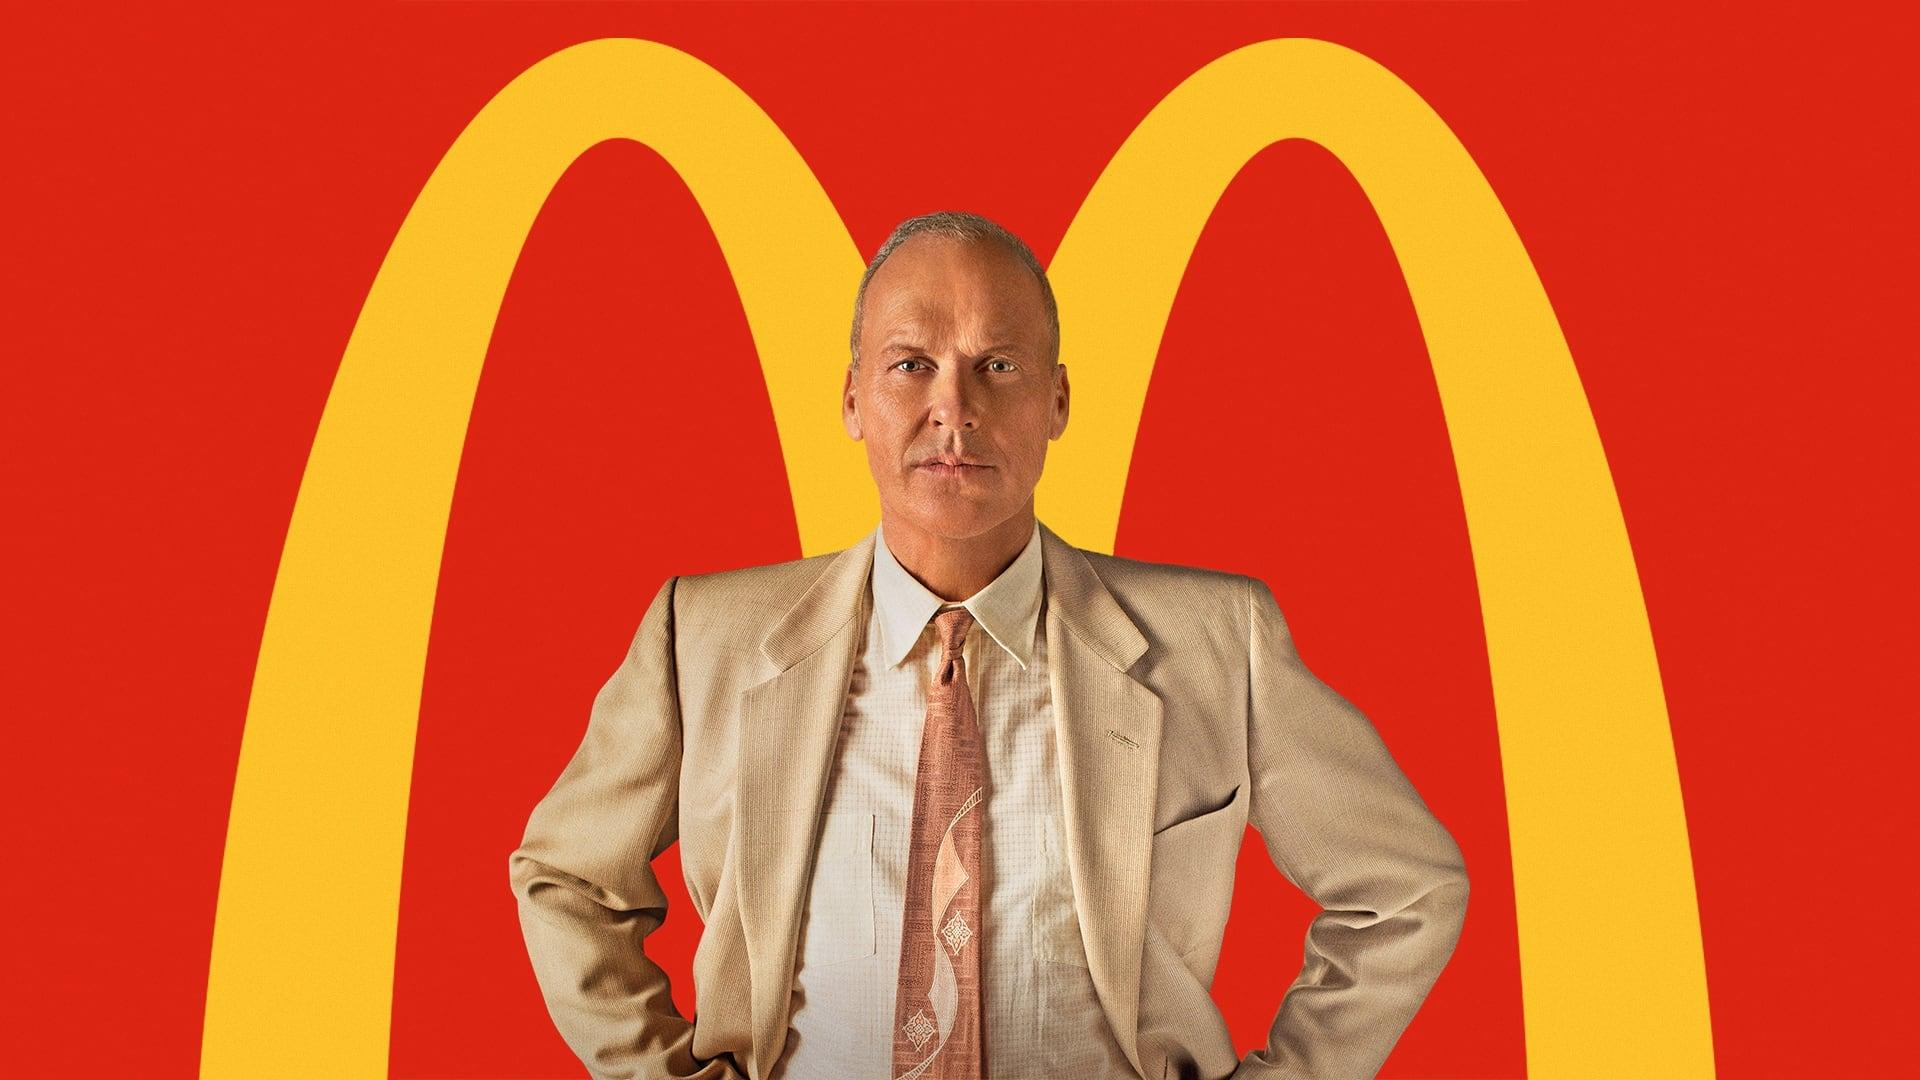 The Founder backdrop